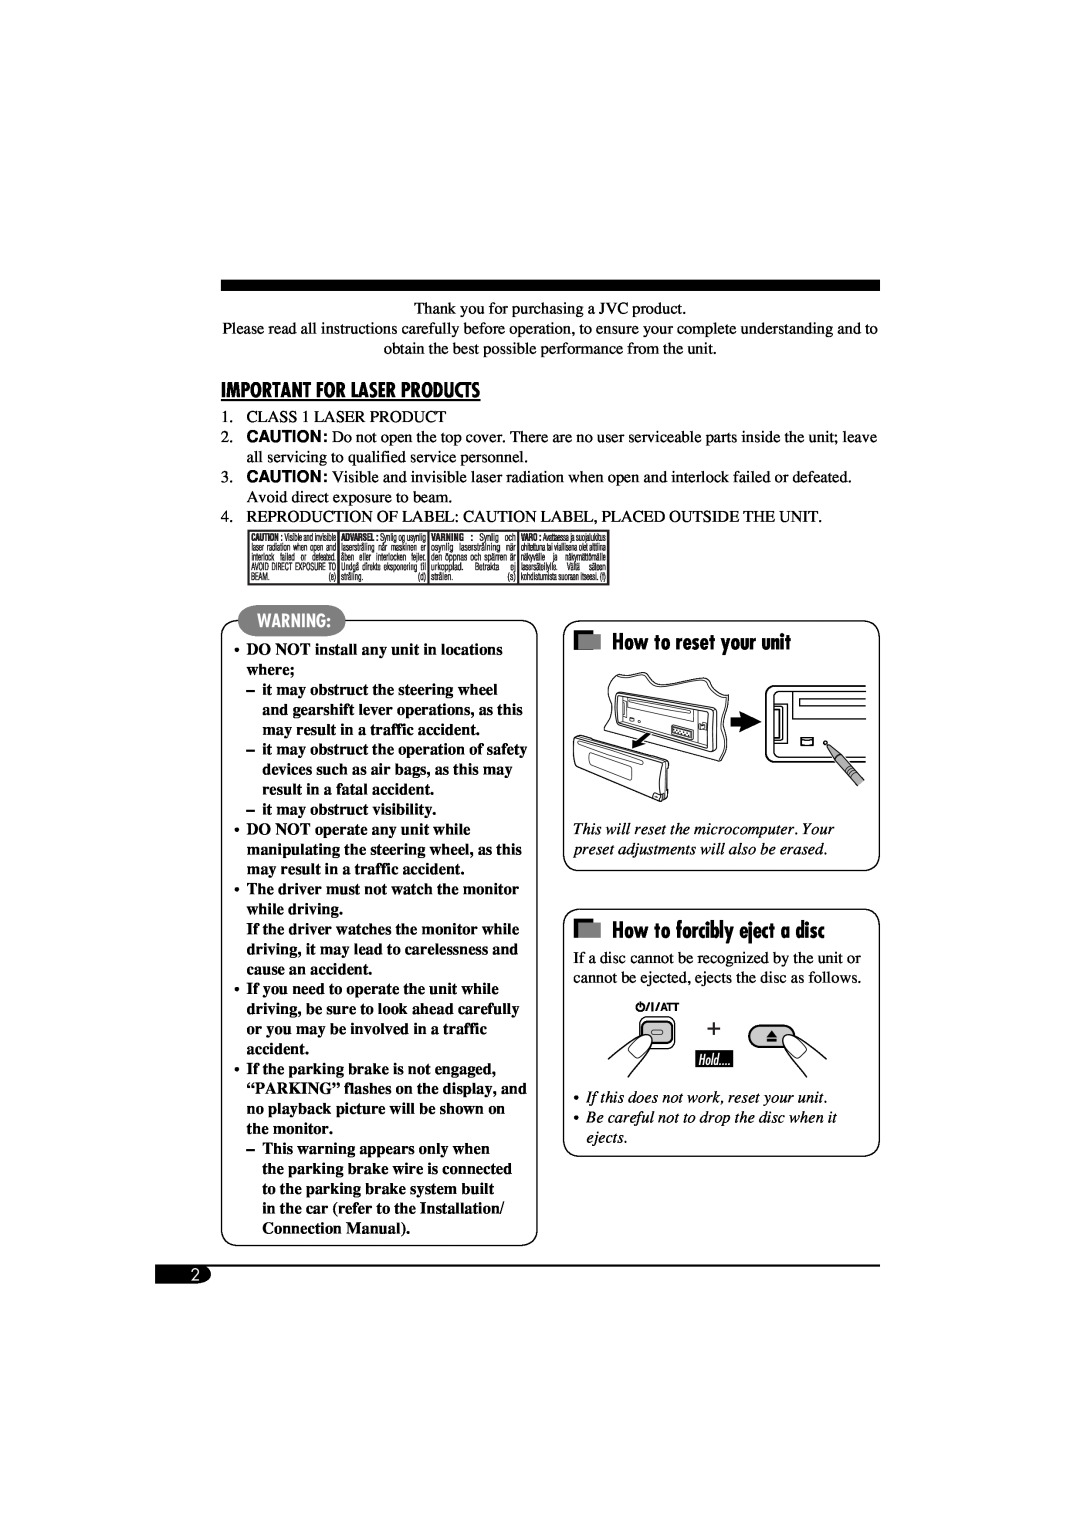 JVC KD-SV3104 manual How to reset your unit, How to forcibly eject a disc, Important For Laser Products 